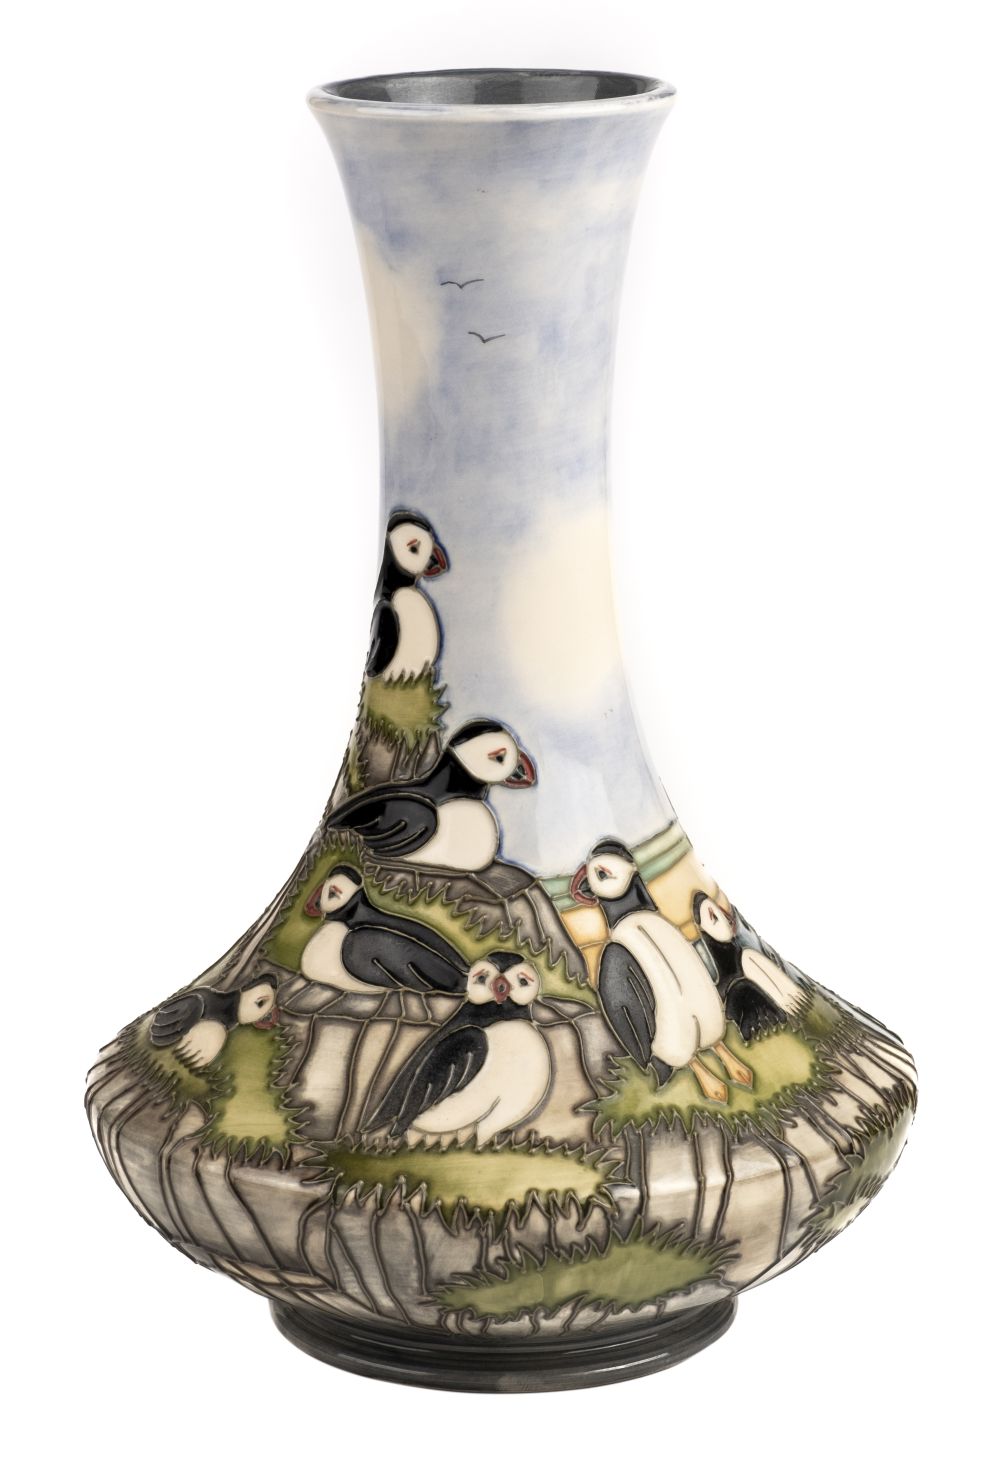 * Moorcroft. A Moorcroft pottery 'Puffin' pattern vase designed by Kerry Goodwin